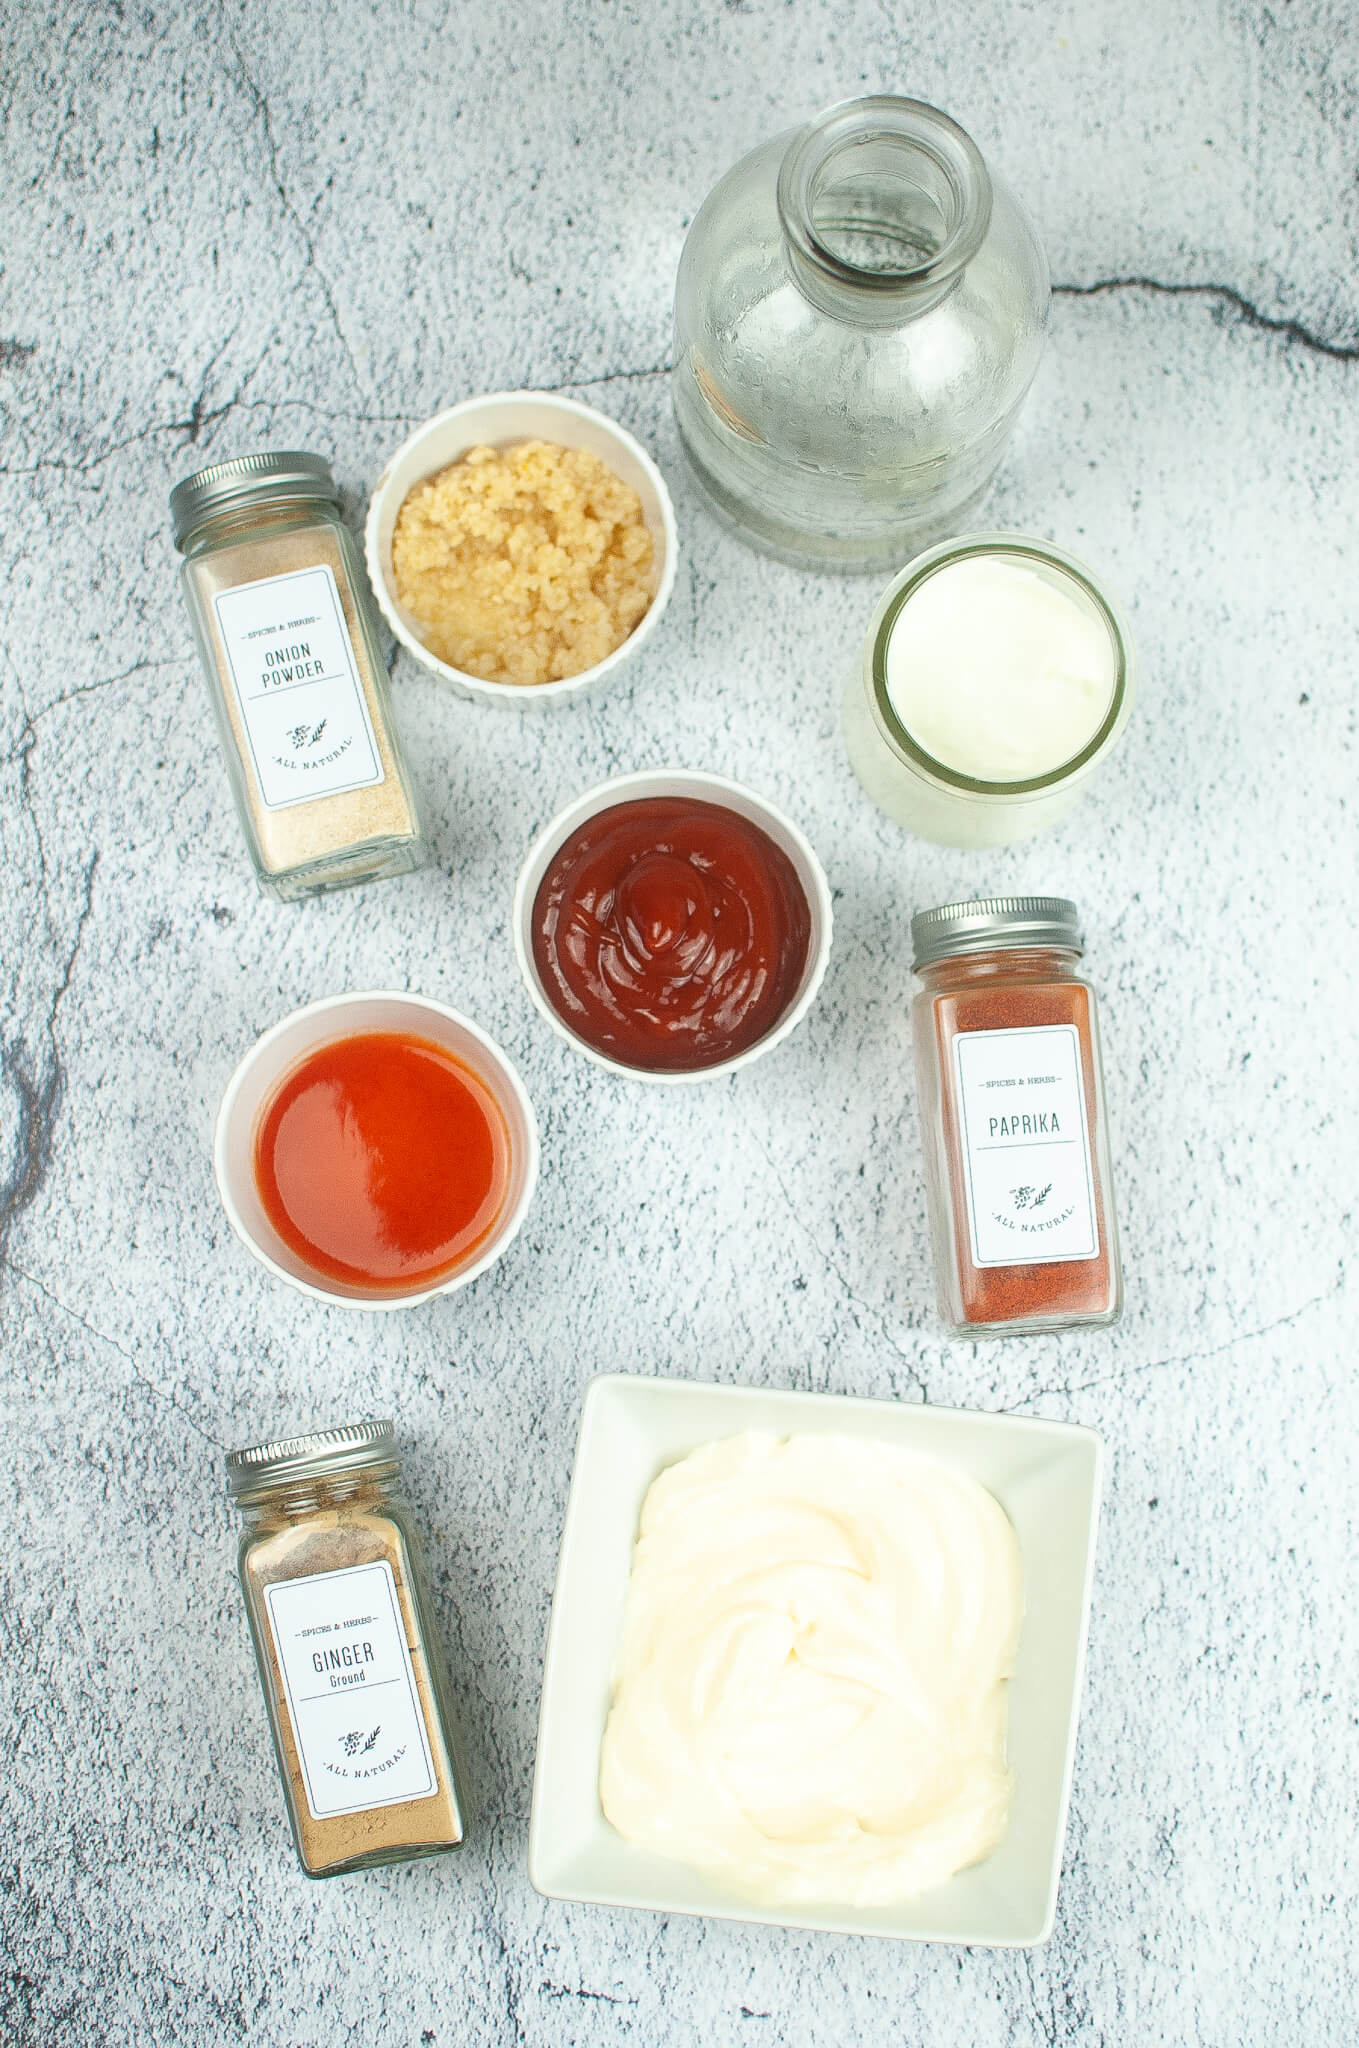 Mayo, seasonings and other ingredients to create the sauce.